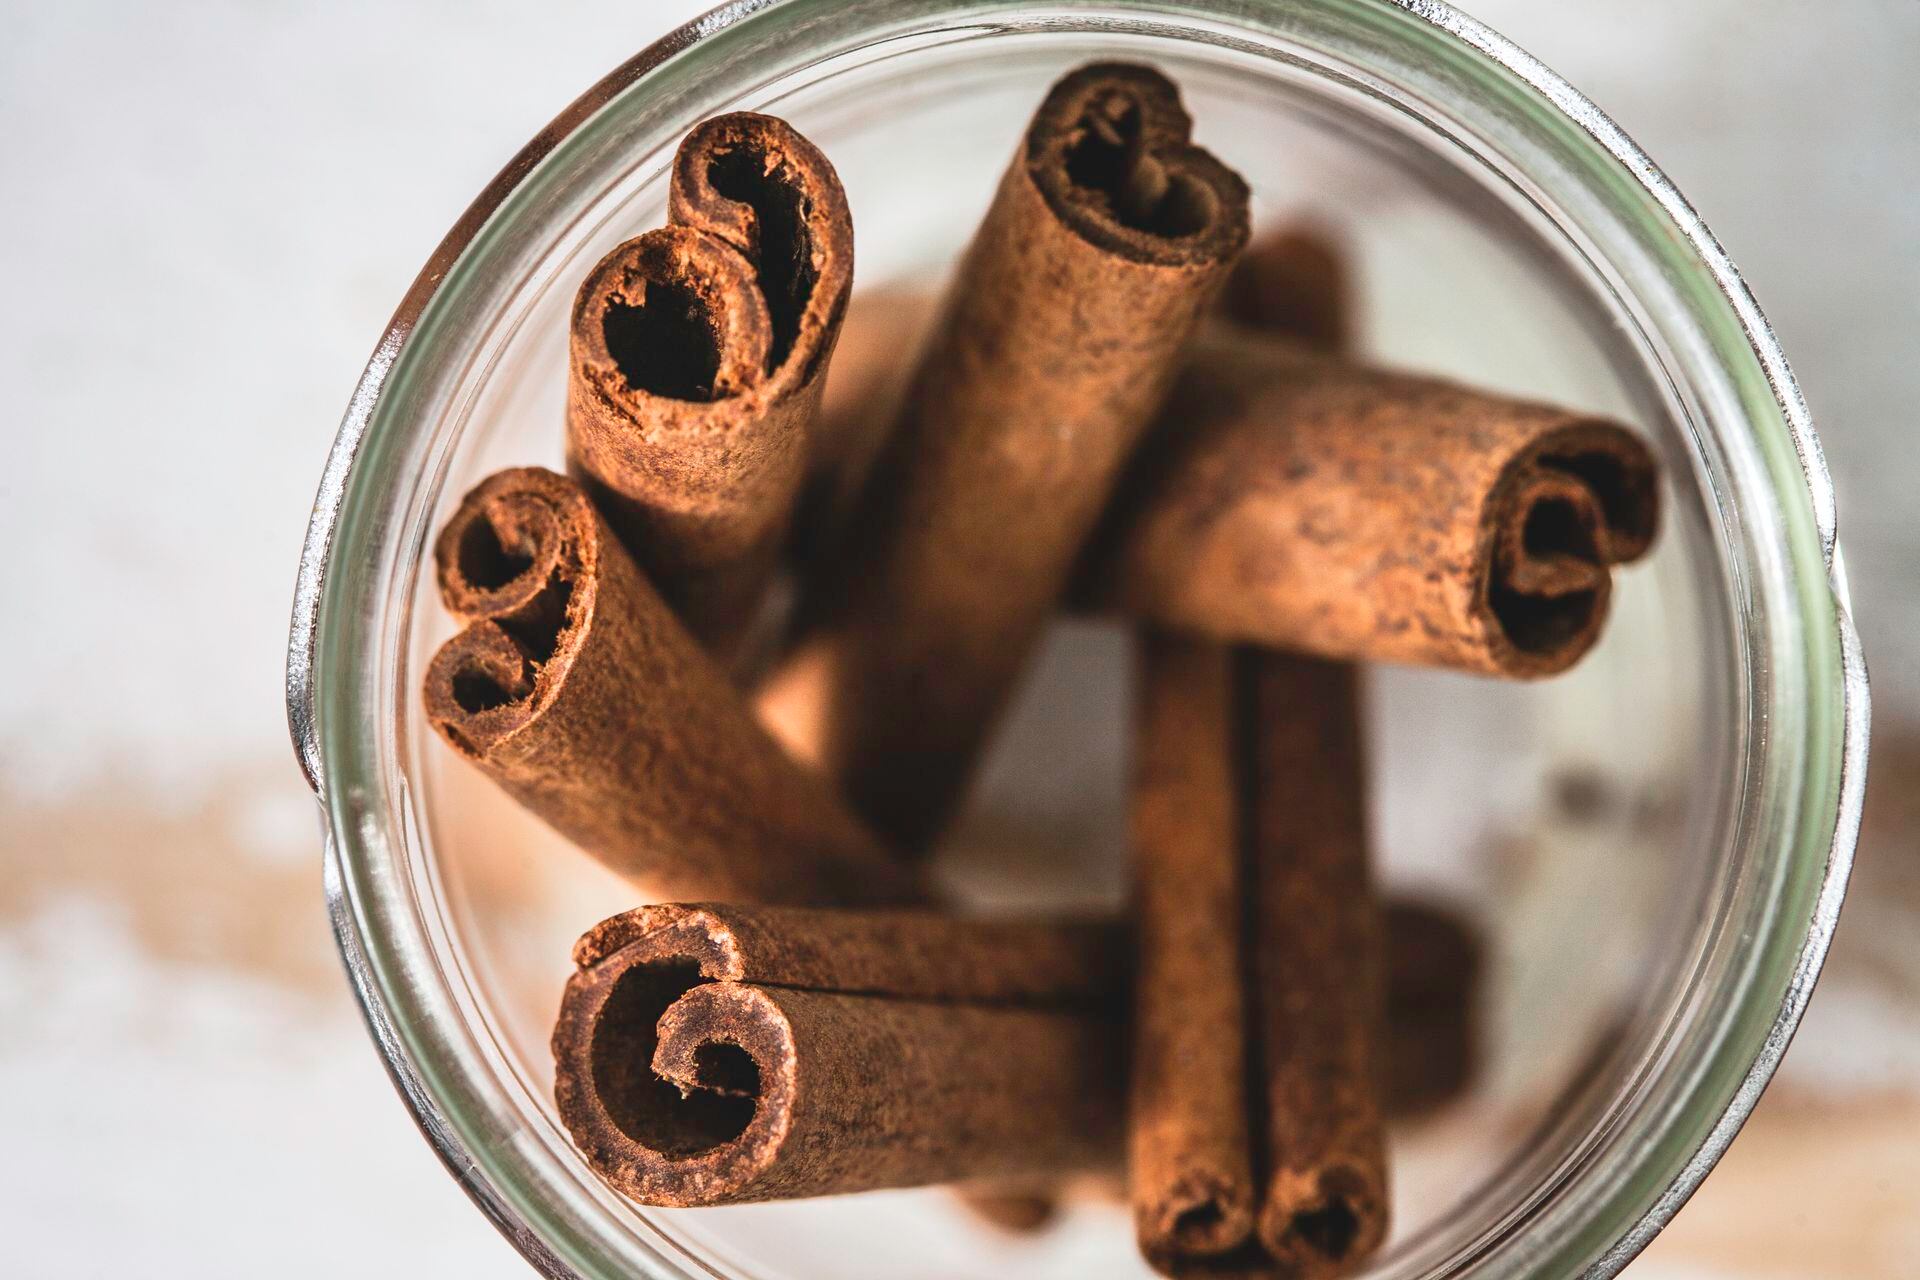 Cinnamon is a spice made up of antioxidants.